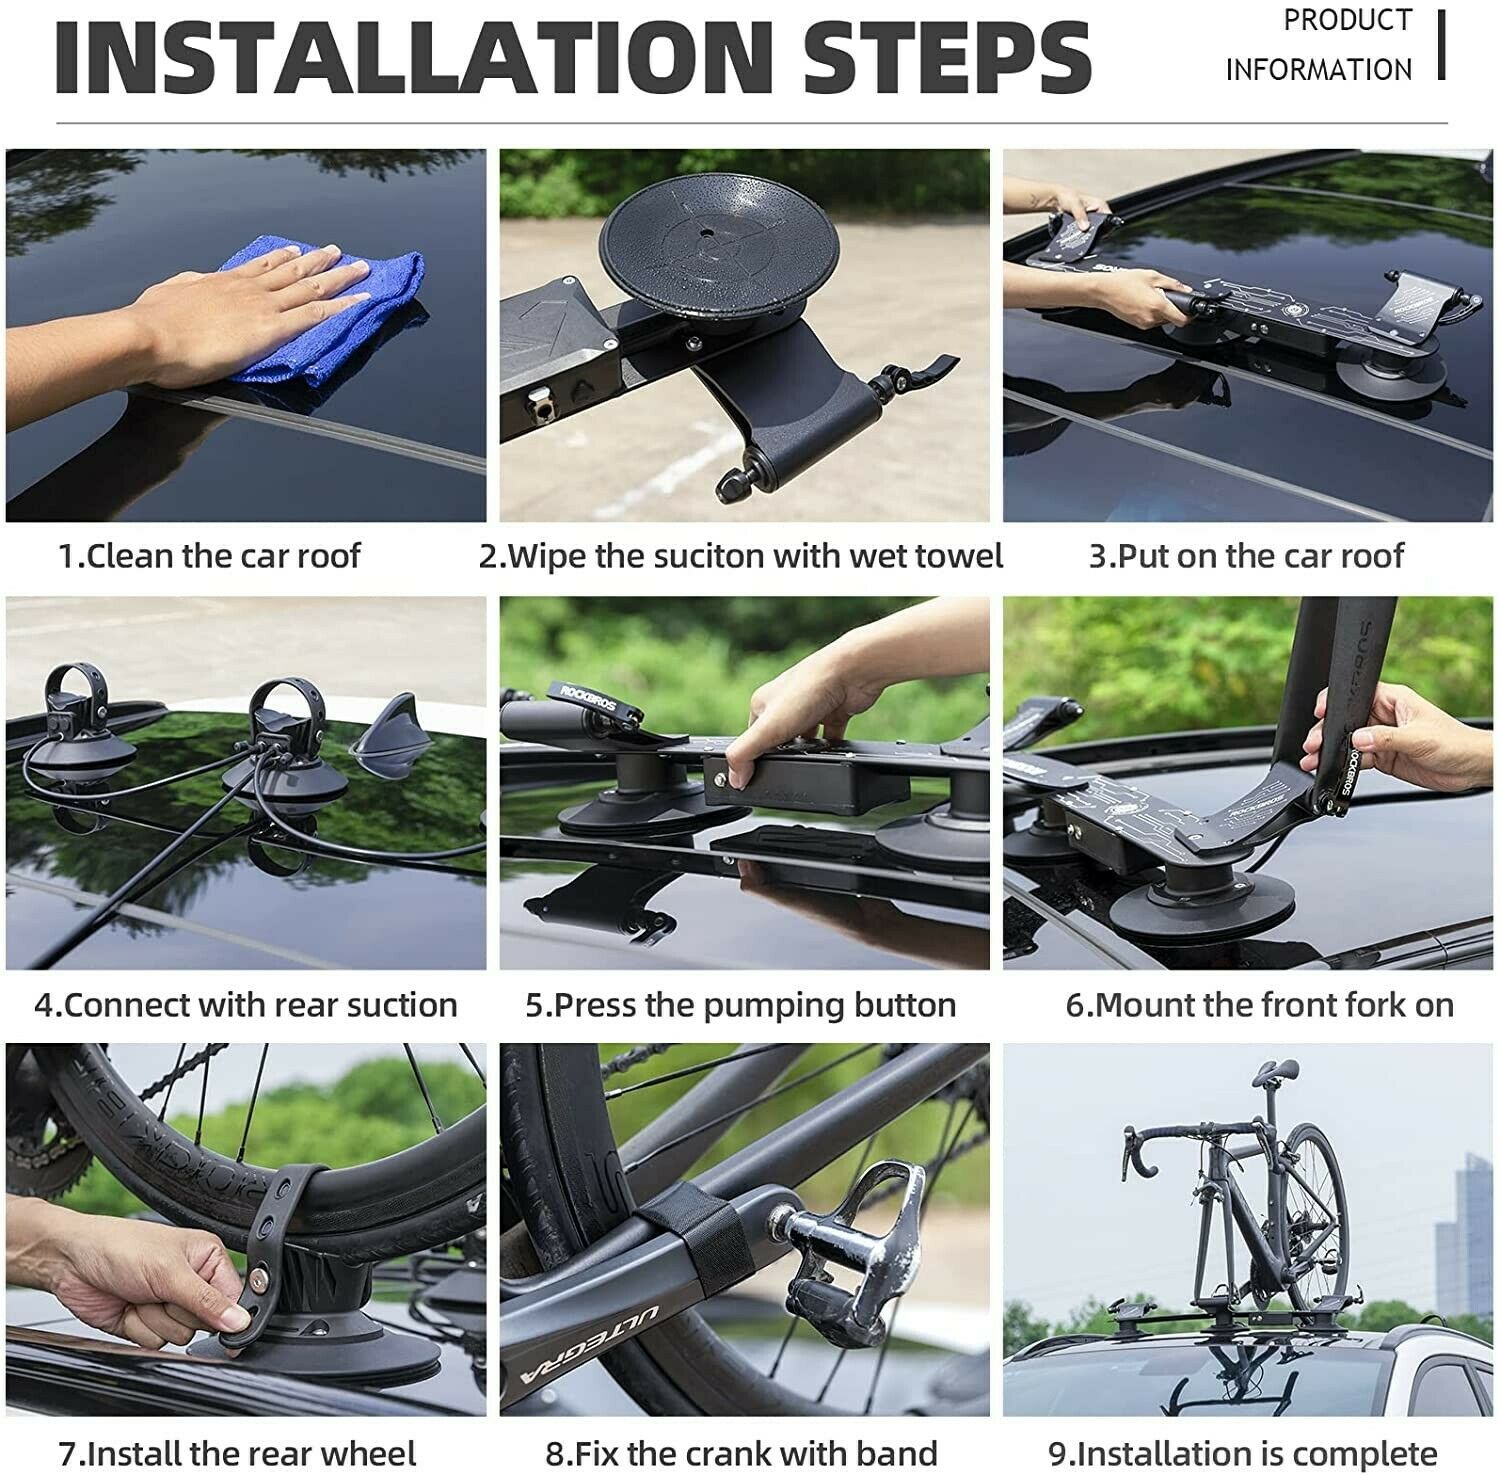 ROCKBROS Electric Suction Cup Roof Rack for 1-3 Bikes